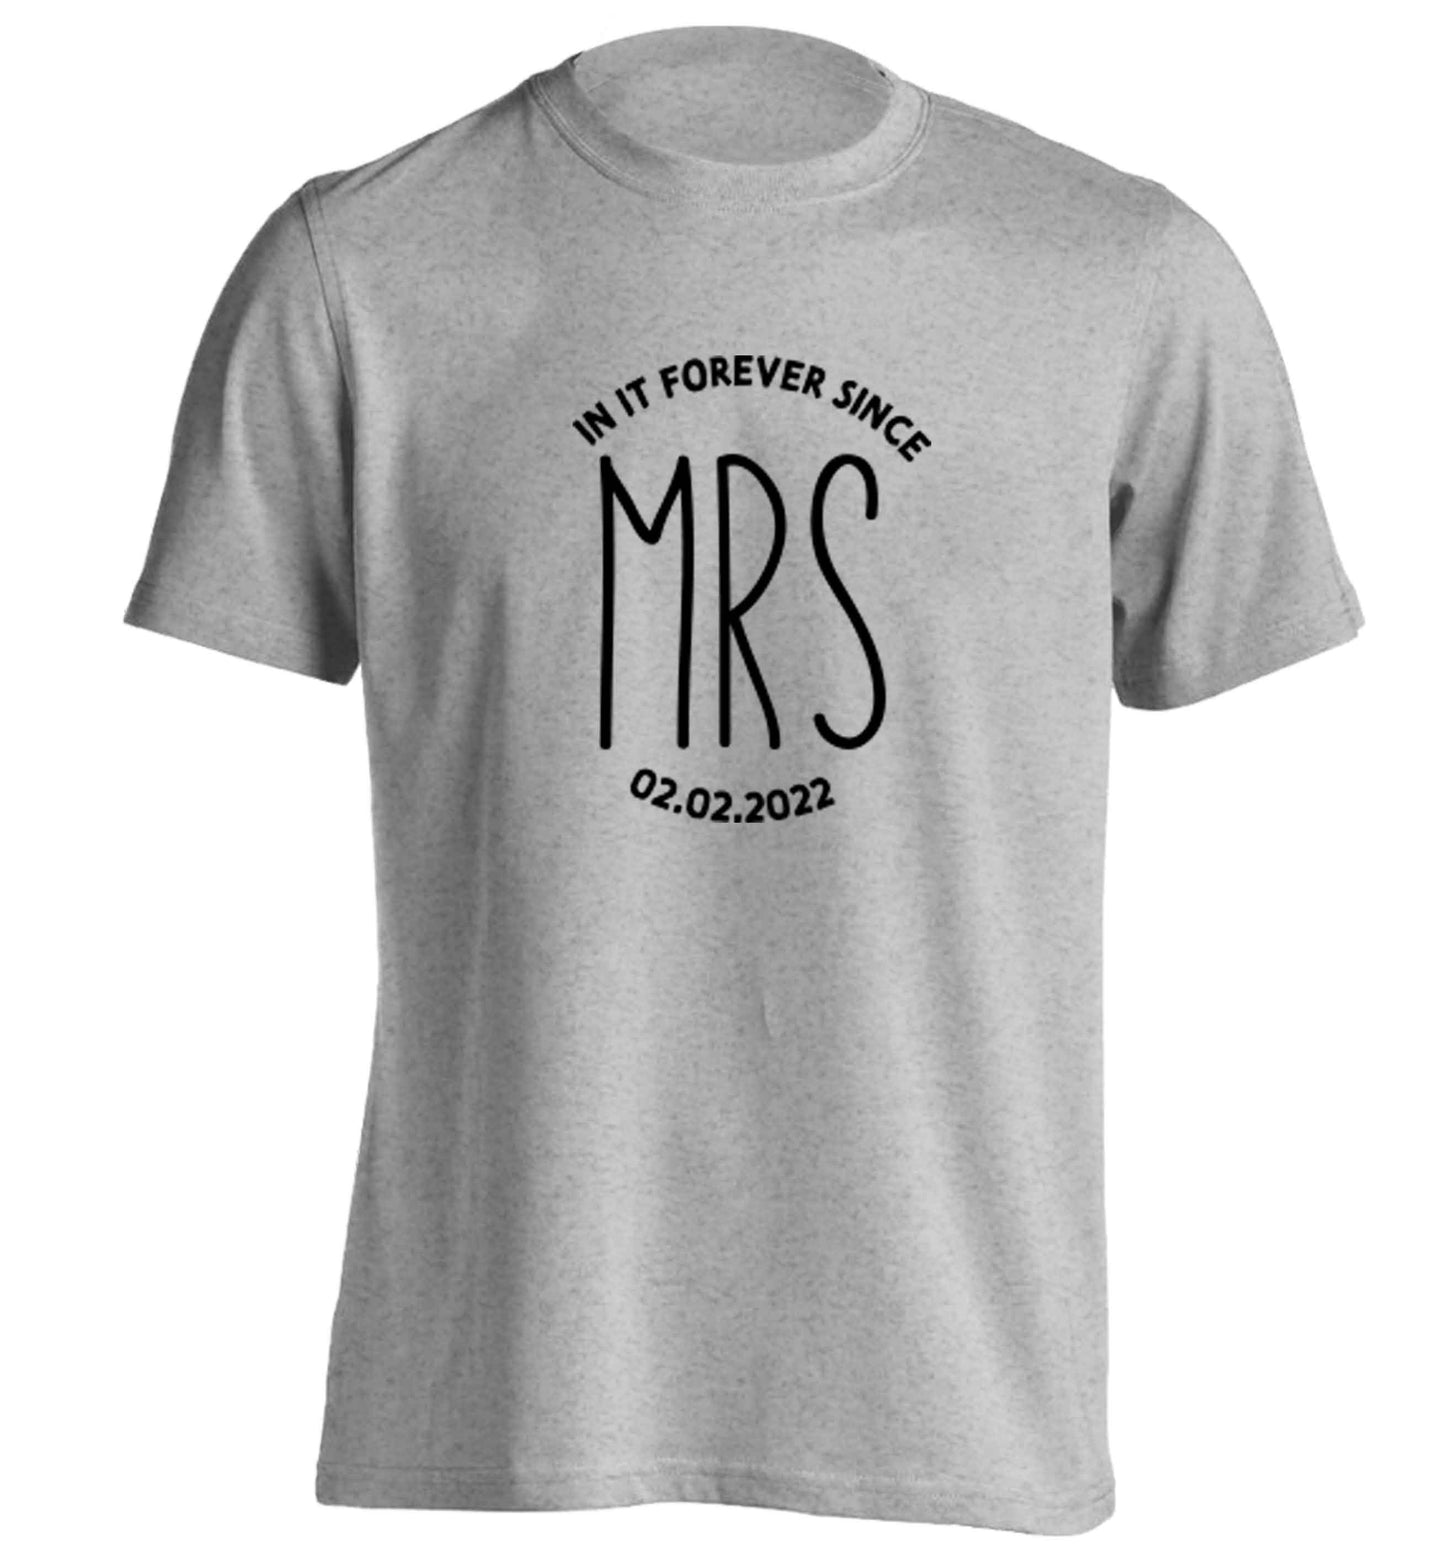 Funny matching gifts for him and her! Get matchy matchy, ideal for newlywed couples or a little valentines gift! adults unisex grey Tshirt 2XL